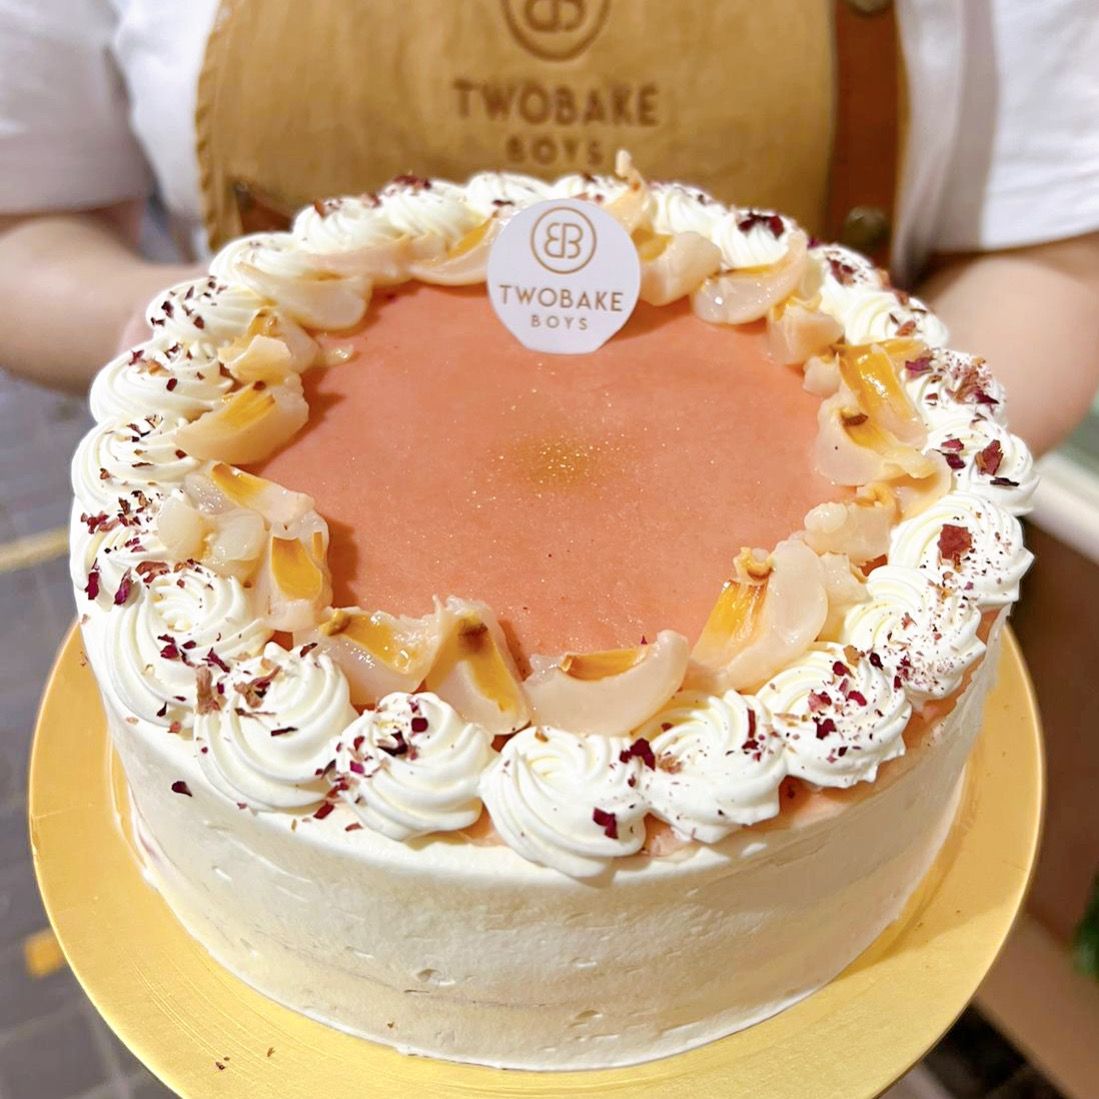 Lychee rose crepe cake 6" 🌹with rose tea sauce  suitable for 6-8 pax